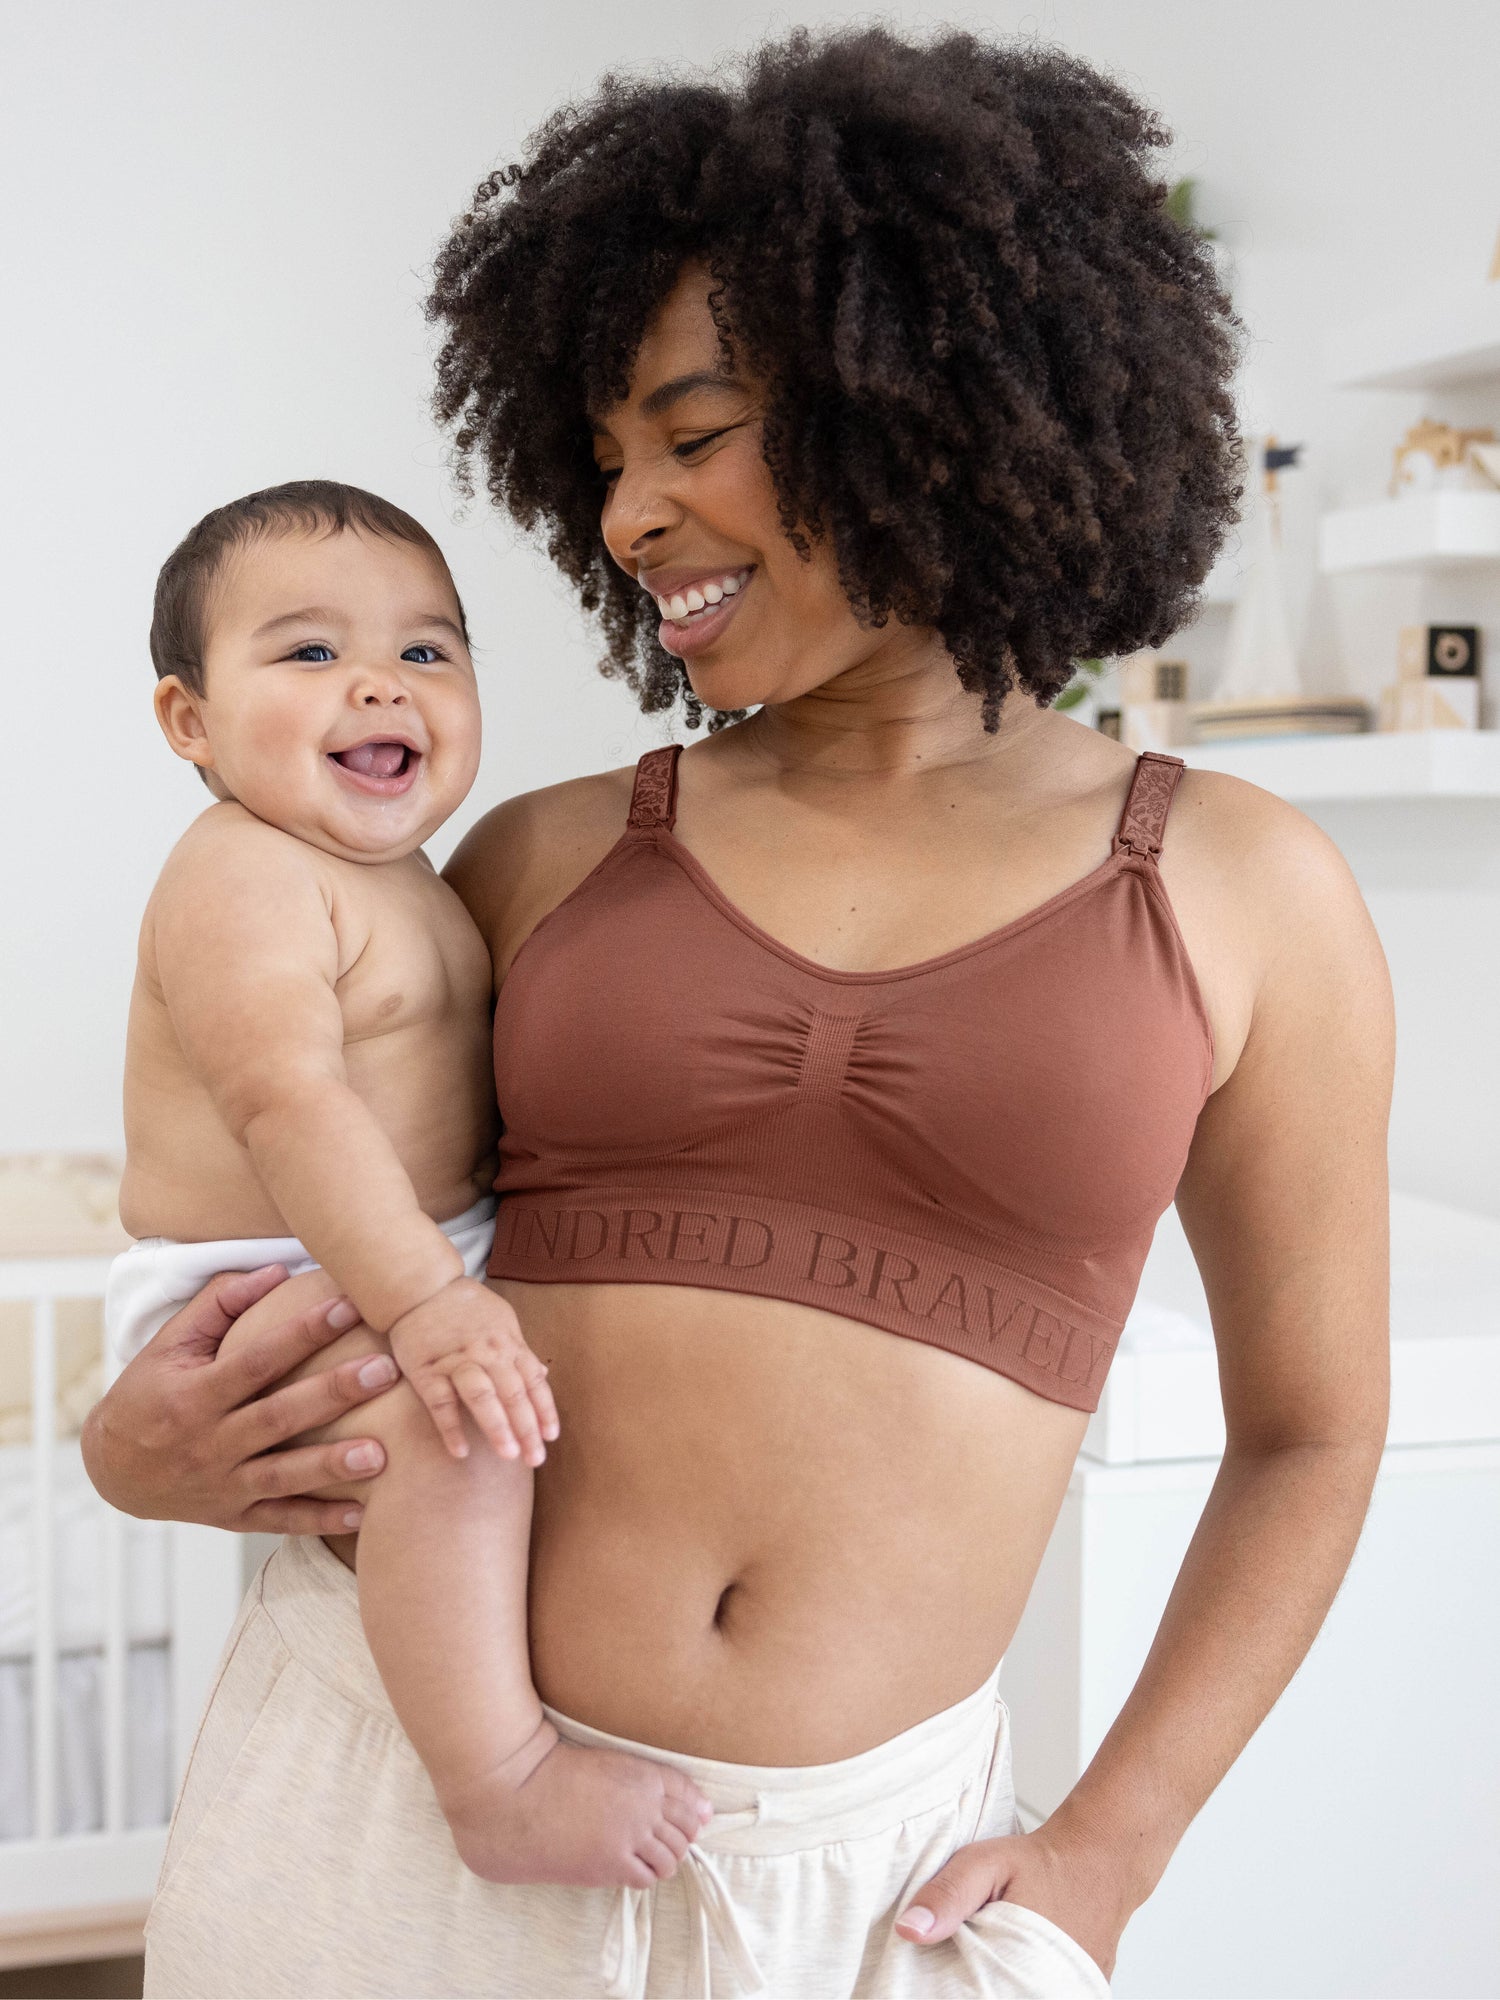 Kindred Bravely Ribbed Signature Cotton Nursing & Maternity Bra - Twilight,  Small-Busty